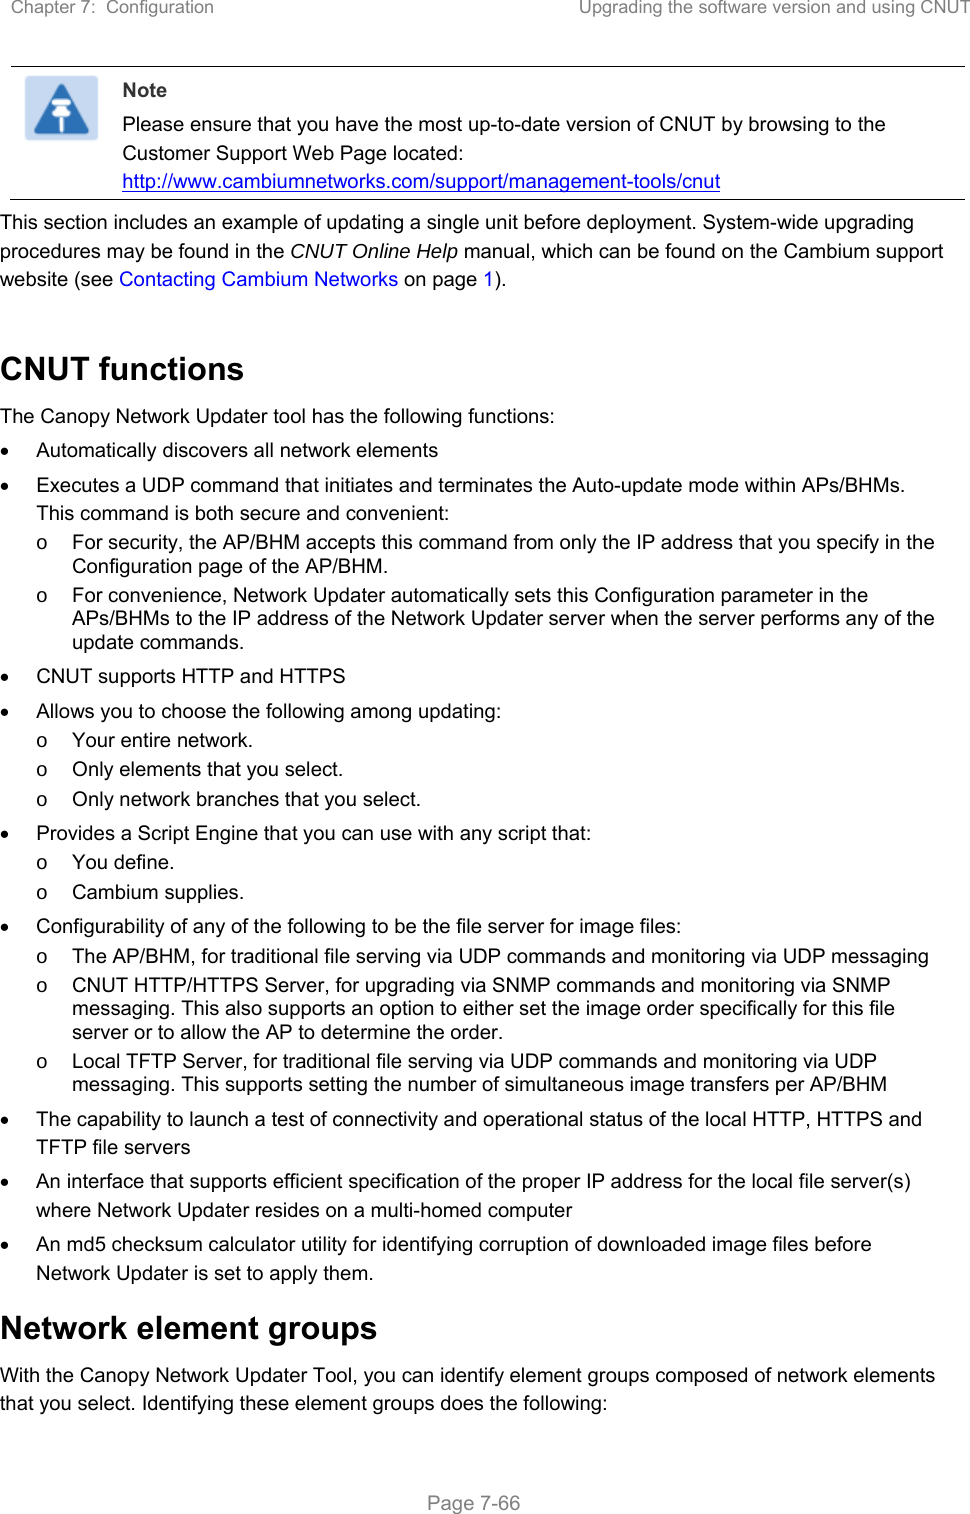 Chapter 7:  Configuration  Upgrading the software version and using CNUT   Page 7-66  Note Please ensure that you have the most up-to-date version of CNUT by browsing to the Customer Support Web Page located: http://www.cambiumnetworks.com/support/management-tools/cnut This section includes an example of updating a single unit before deployment. System-wide upgrading procedures may be found in the CNUT Online Help manual, which can be found on the Cambium support website (see Contacting Cambium Networks on page 1).  CNUT functions The Canopy Network Updater tool has the following functions:   Automatically discovers all network elements   Executes a UDP command that initiates and terminates the Auto-update mode within APs/BHMs. This command is both secure and convenient: o  For security, the AP/BHM accepts this command from only the IP address that you specify in the Configuration page of the AP/BHM.  o  For convenience, Network Updater automatically sets this Configuration parameter in the APs/BHMs to the IP address of the Network Updater server when the server performs any of the update commands.   CNUT supports HTTP and HTTPS   Allows you to choose the following among updating: o  Your entire network. o  Only elements that you select. o  Only network branches that you select.   Provides a Script Engine that you can use with any script that: o  You define. o  Cambium supplies.   Configurability of any of the following to be the file server for image files: o  The AP/BHM, for traditional file serving via UDP commands and monitoring via UDP messaging o  CNUT HTTP/HTTPS Server, for upgrading via SNMP commands and monitoring via SNMP messaging. This also supports an option to either set the image order specifically for this file server or to allow the AP to determine the order. o  Local TFTP Server, for traditional file serving via UDP commands and monitoring via UDP messaging. This supports setting the number of simultaneous image transfers per AP/BHM   The capability to launch a test of connectivity and operational status of the local HTTP, HTTPS and TFTP file servers   An interface that supports efficient specification of the proper IP address for the local file server(s) where Network Updater resides on a multi-homed computer   An md5 checksum calculator utility for identifying corruption of downloaded image files before Network Updater is set to apply them. Network element groups  With the Canopy Network Updater Tool, you can identify element groups composed of network elements that you select. Identifying these element groups does the following: 